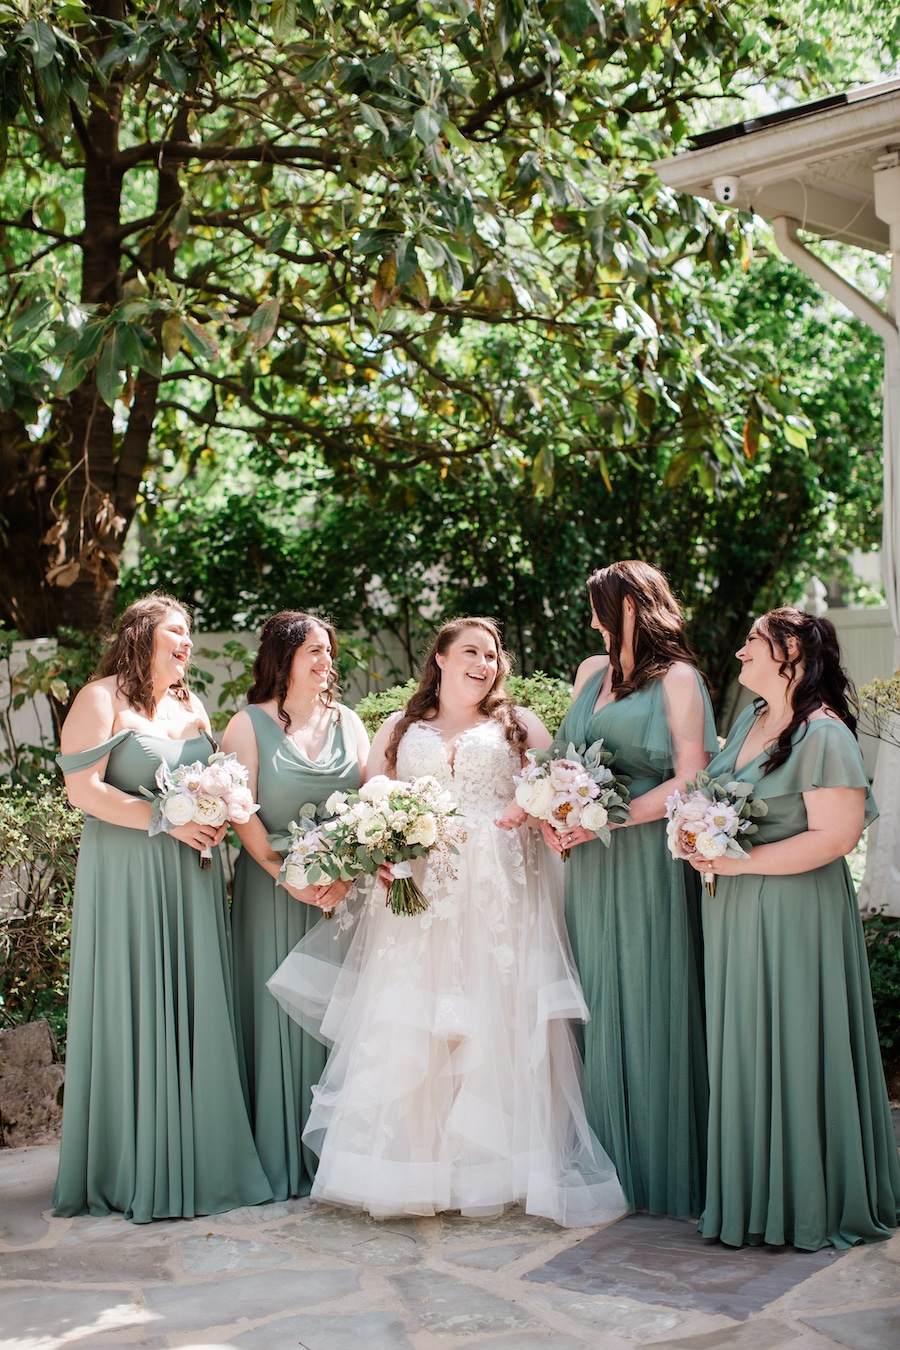 Get inspired by this neutral wedding color palette from Nashville garden wedding venue CJ's Off the Square.